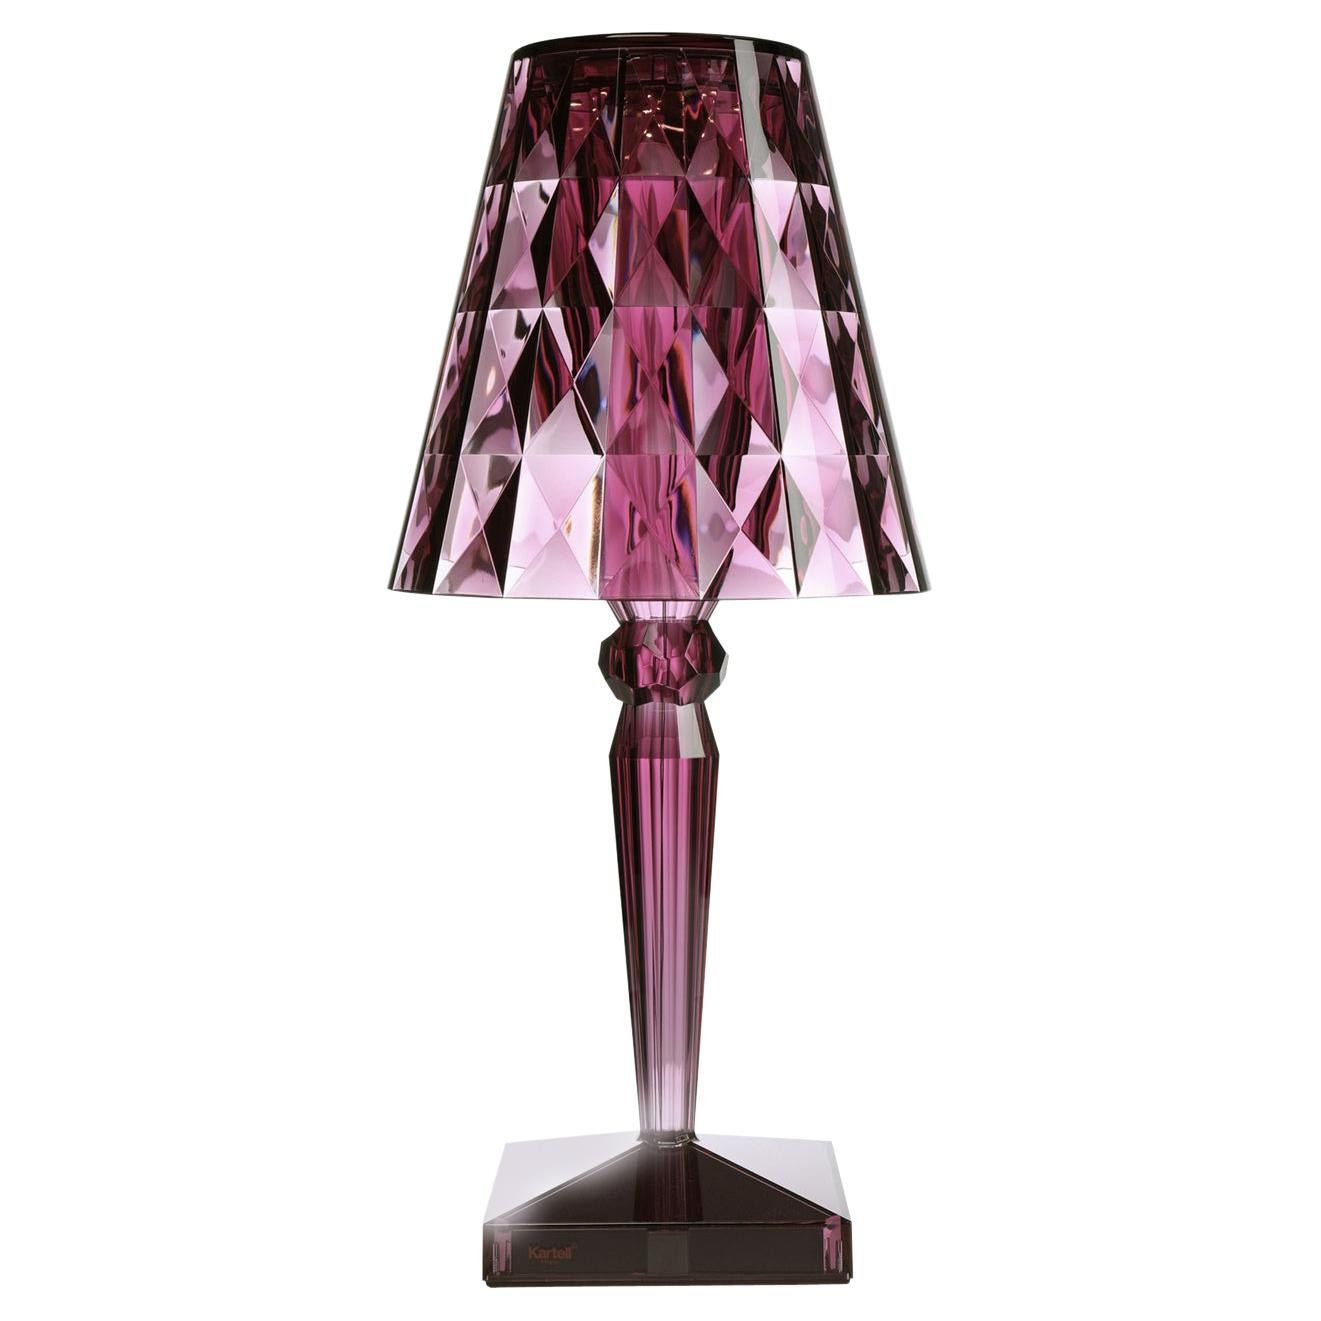 Kartell Big Battery Lamp in Plum by Ferruccio Laviani For Sale